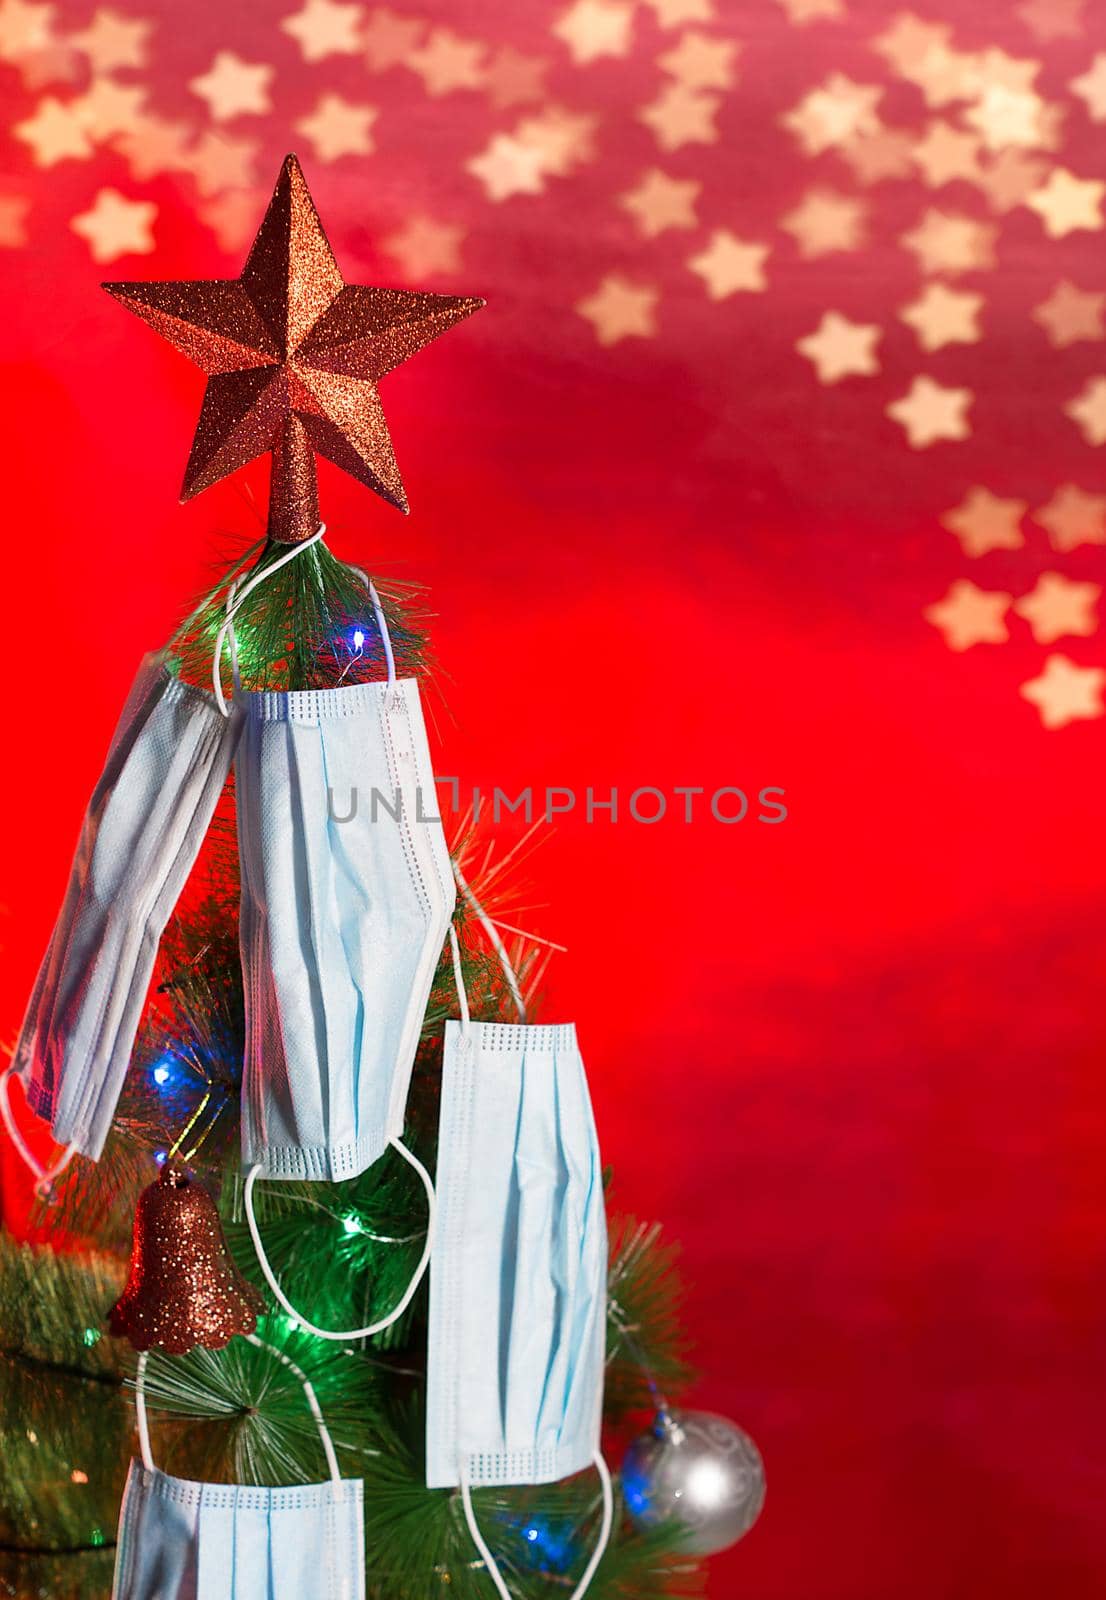 2020 Christmas tree decorated with colored lights ornaments and surgical masks with a red star at the tip and a red background with bokeh of stars